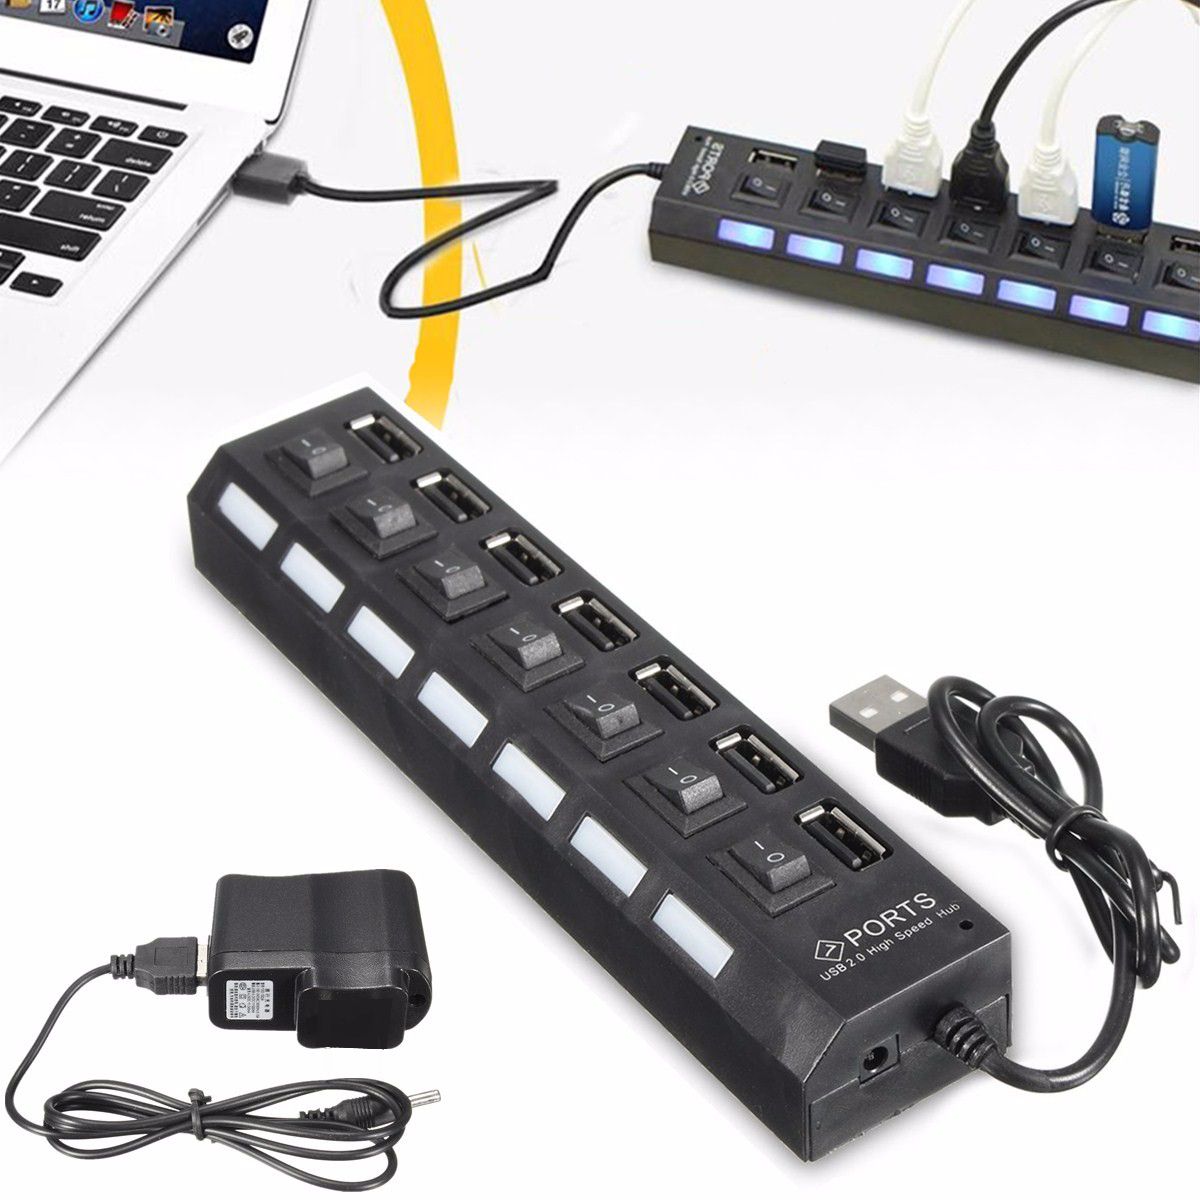 7-Port-High-Speed-USB-20-Hub---Power-Adapter-ONOFF-for-Switch-for-MAC-PC-Laptop-1762543